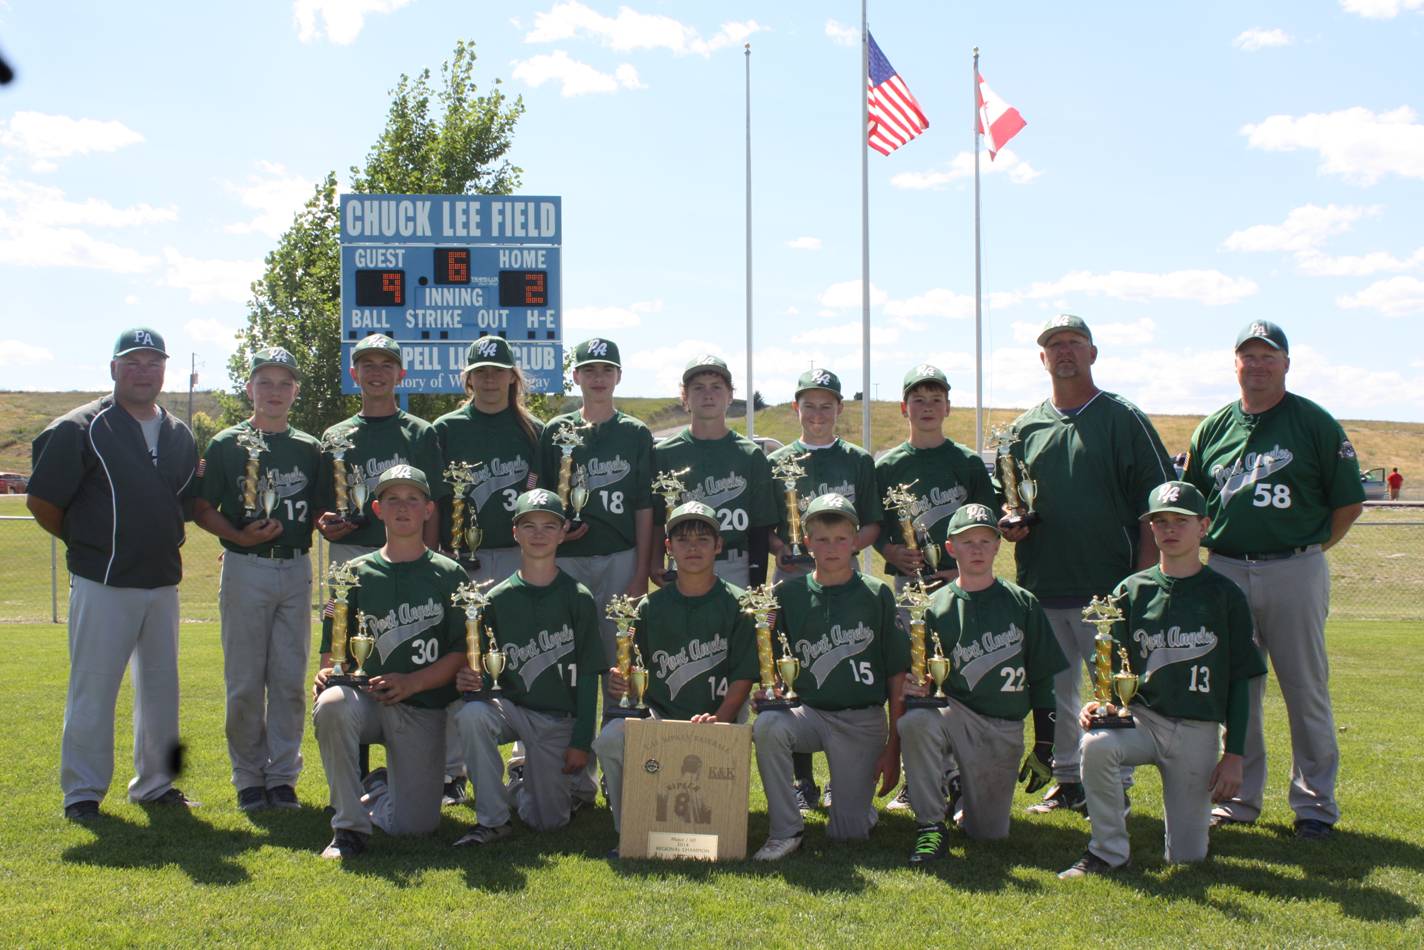 The Port Angeles 12U baseball team claimed the Pacific Northwest Regional Cal Ripken 12U baseball tournament championship over the weekend with a 9-2 win over Caldwell